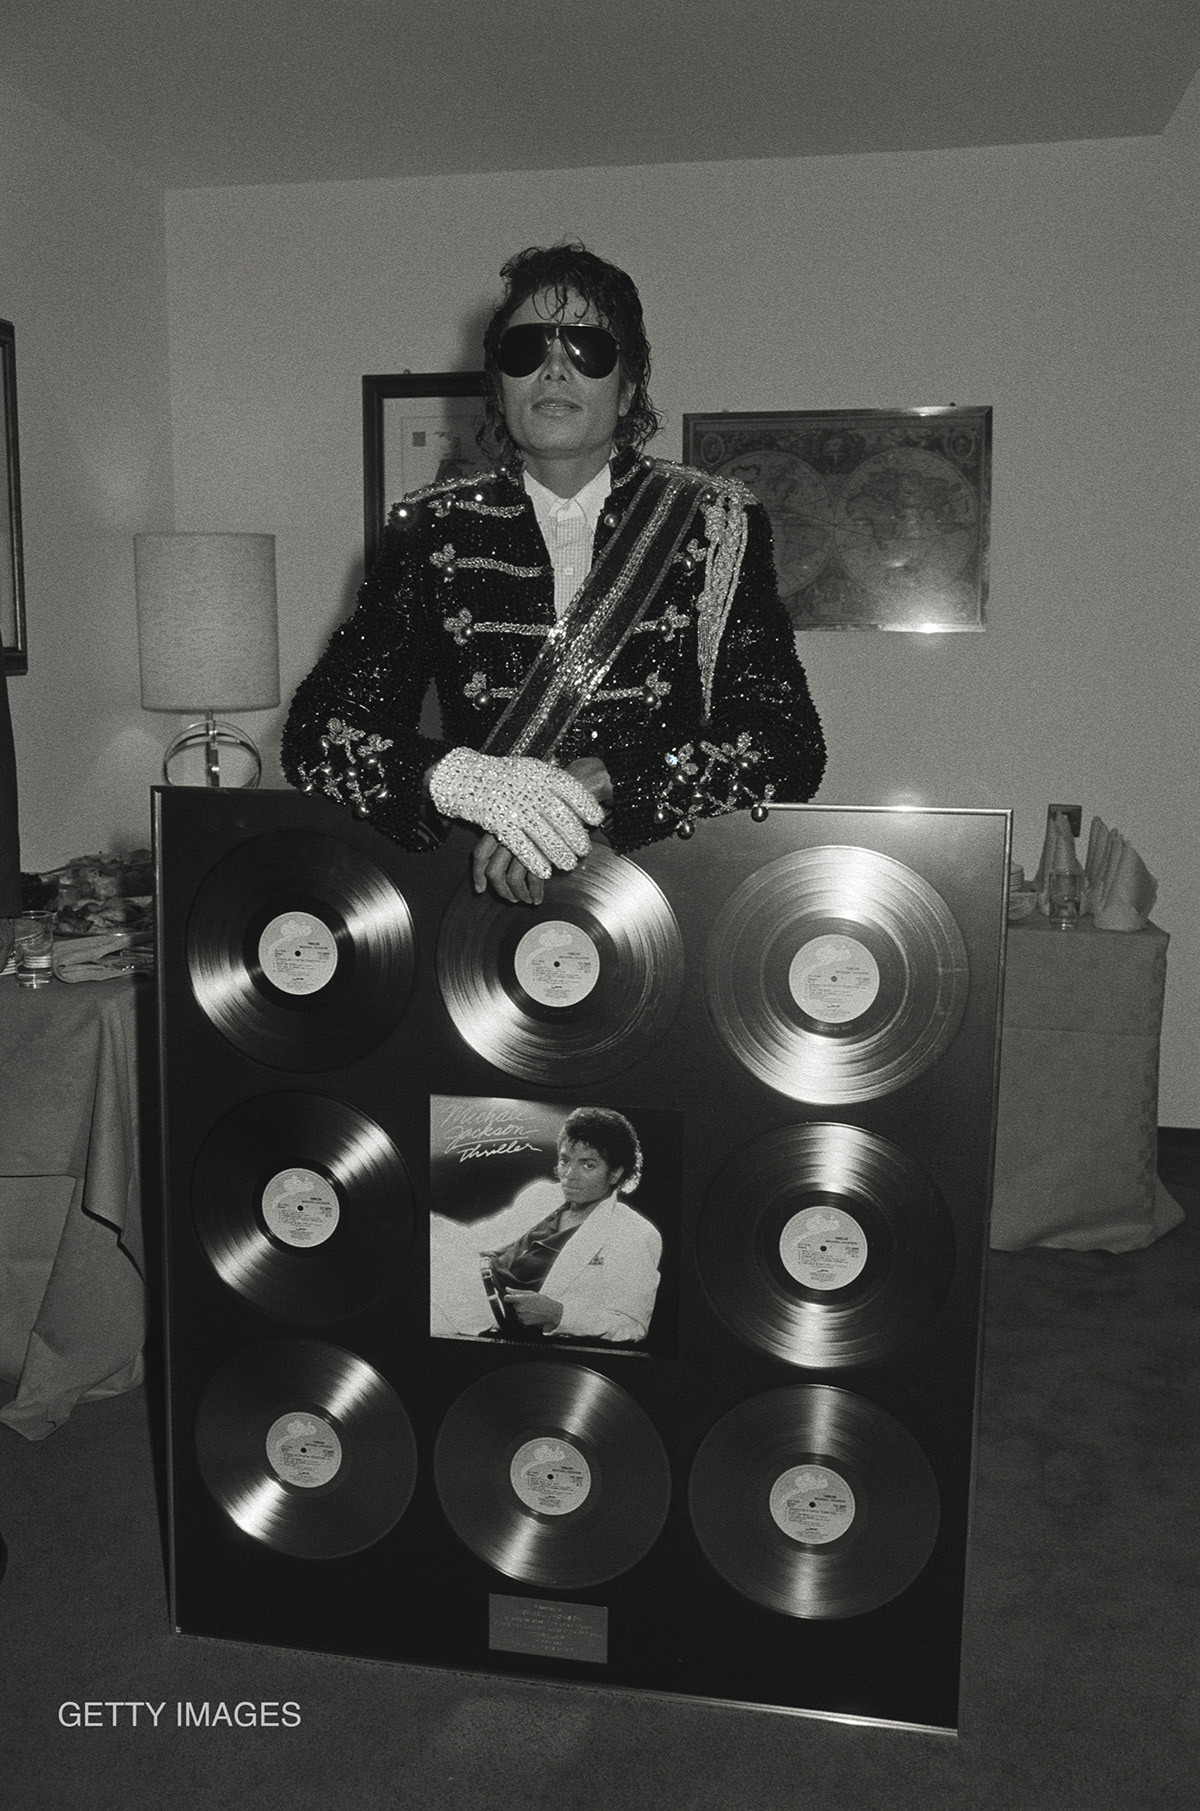 Michael Jackson in London to accept gold discs for his Thriller album in 1985